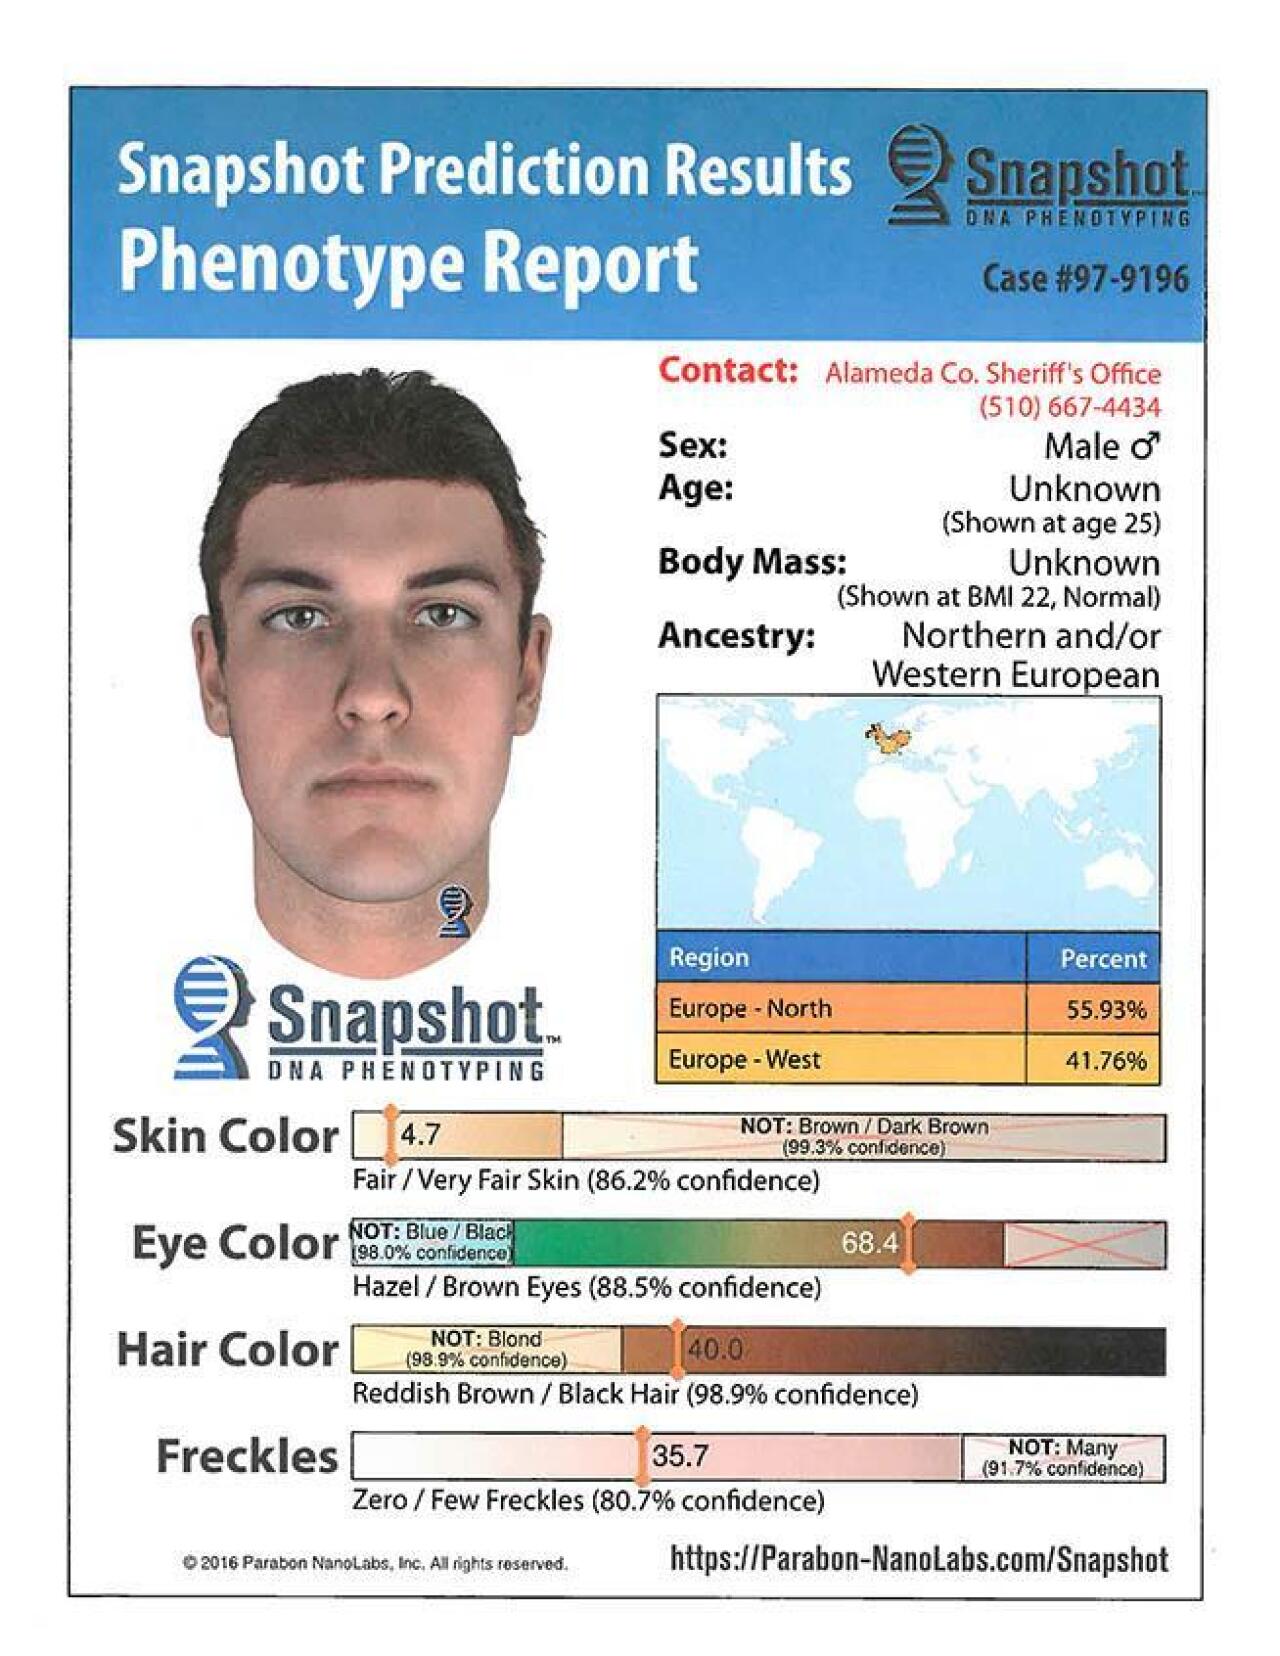 [IMAGE] Sheriff’s Office hopes DNA ‘image’ solves Livermore cold case